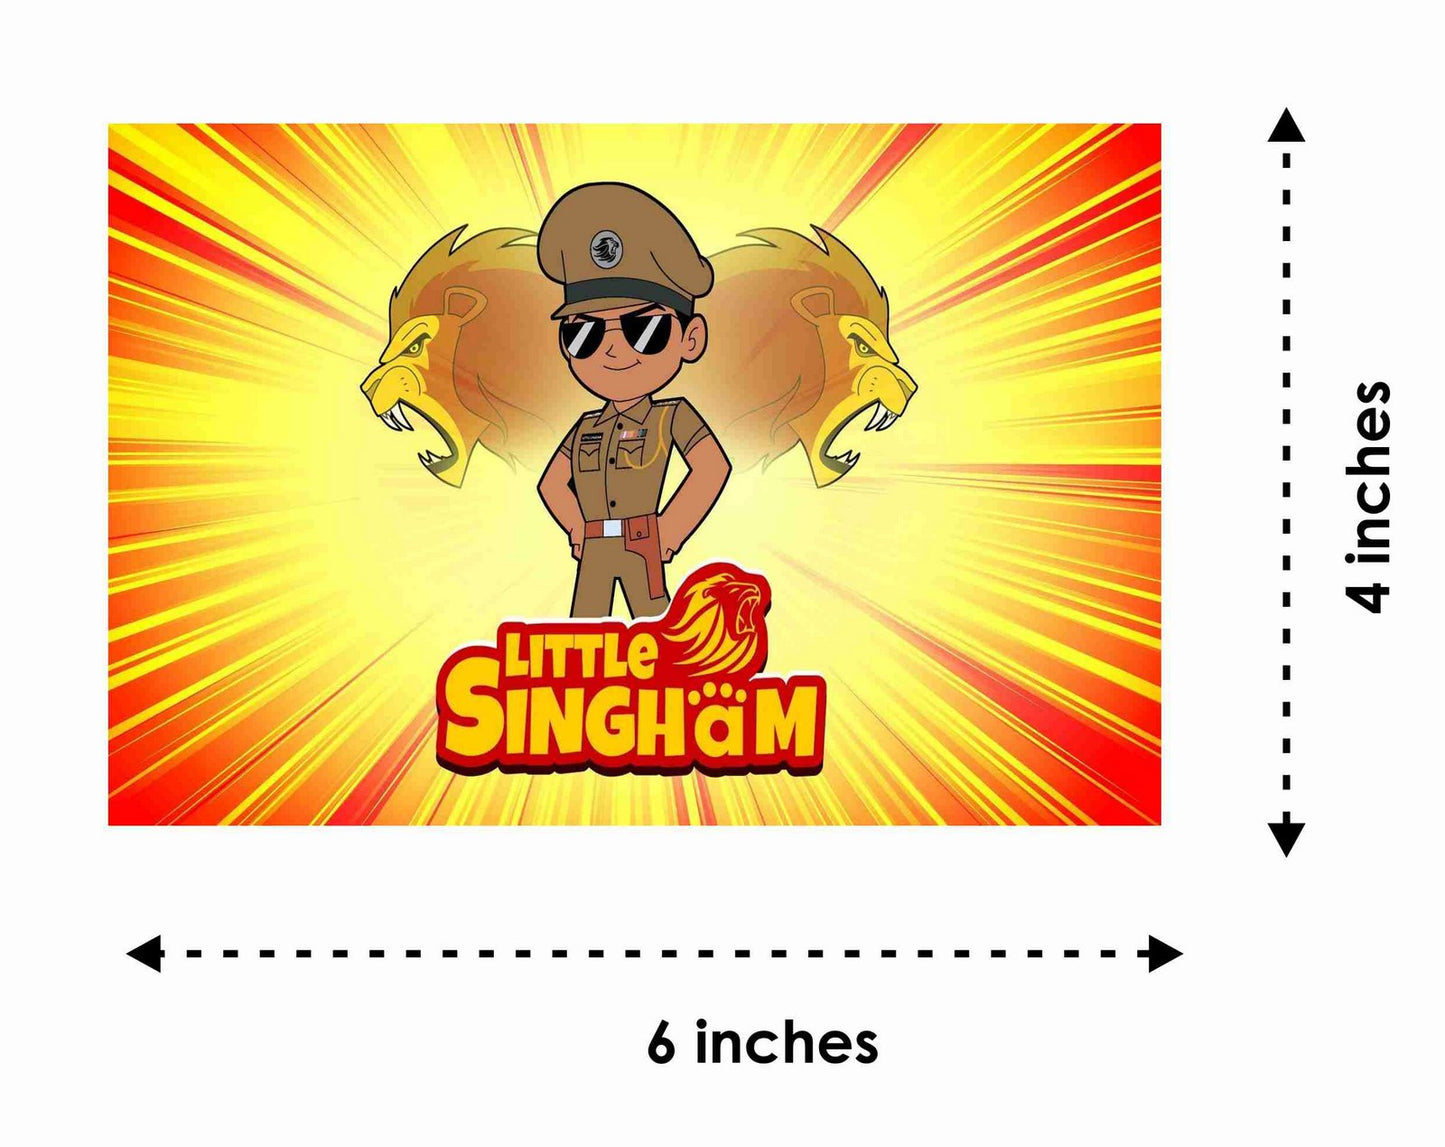 Little Singham Theme Children's Birthday Party Invitations Cards with Envelopes - Kids Birthday Party Invitations for Boys or Girls,- Invitation Cards (Pack of 10)